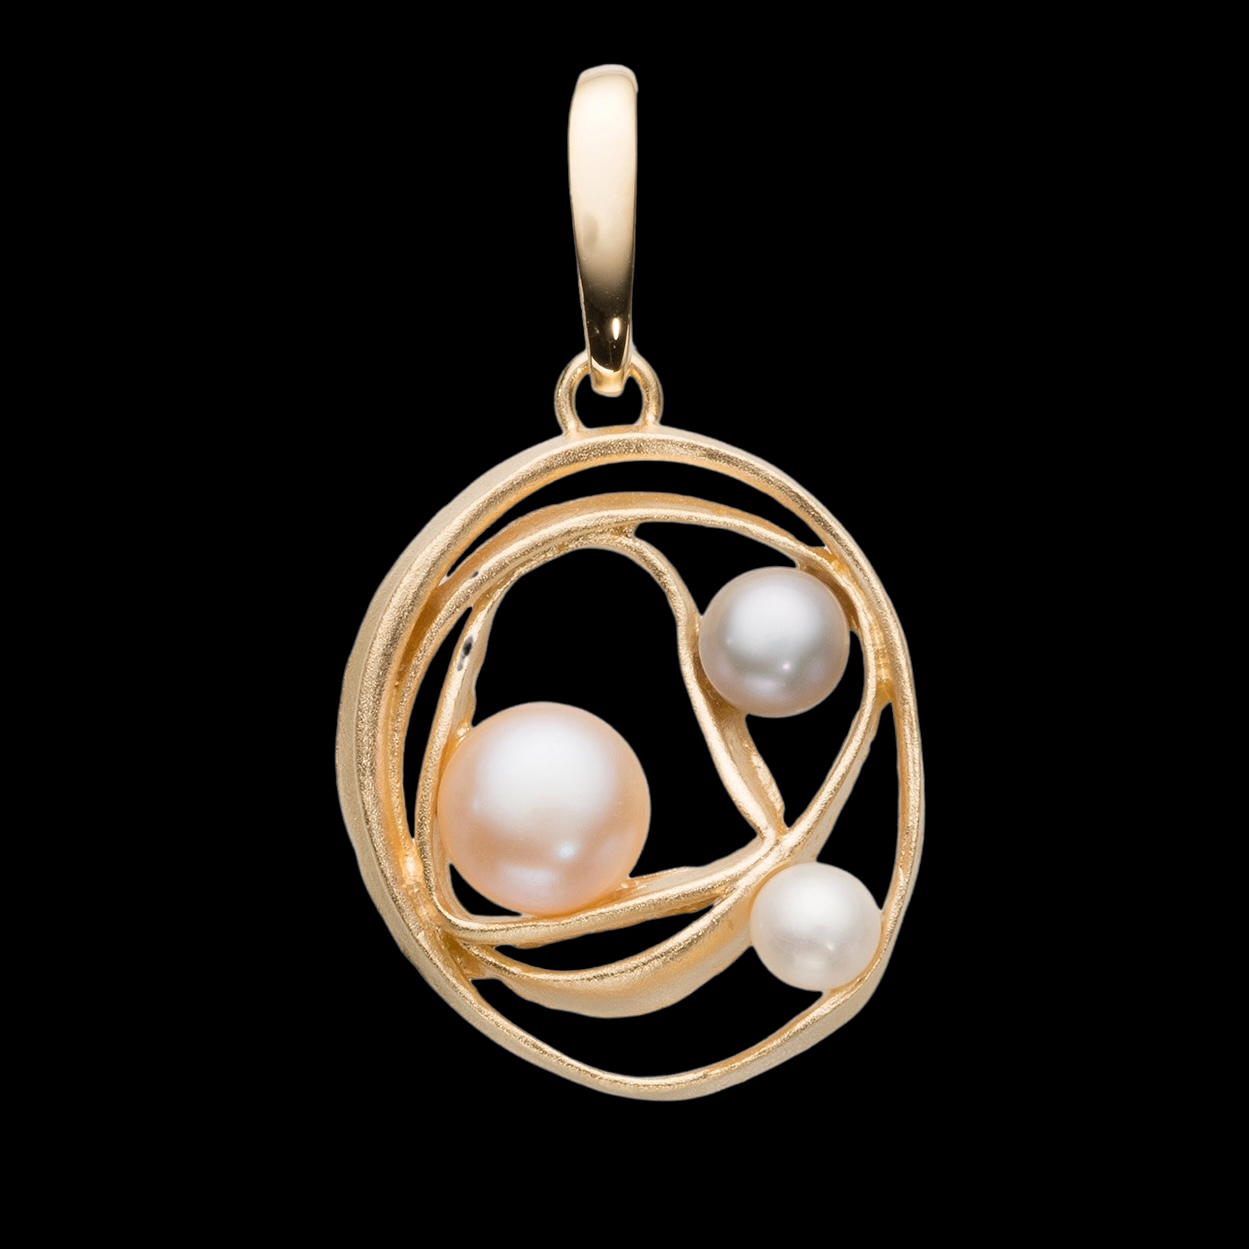 Magnificent gold plated pendant with freshwater pearls